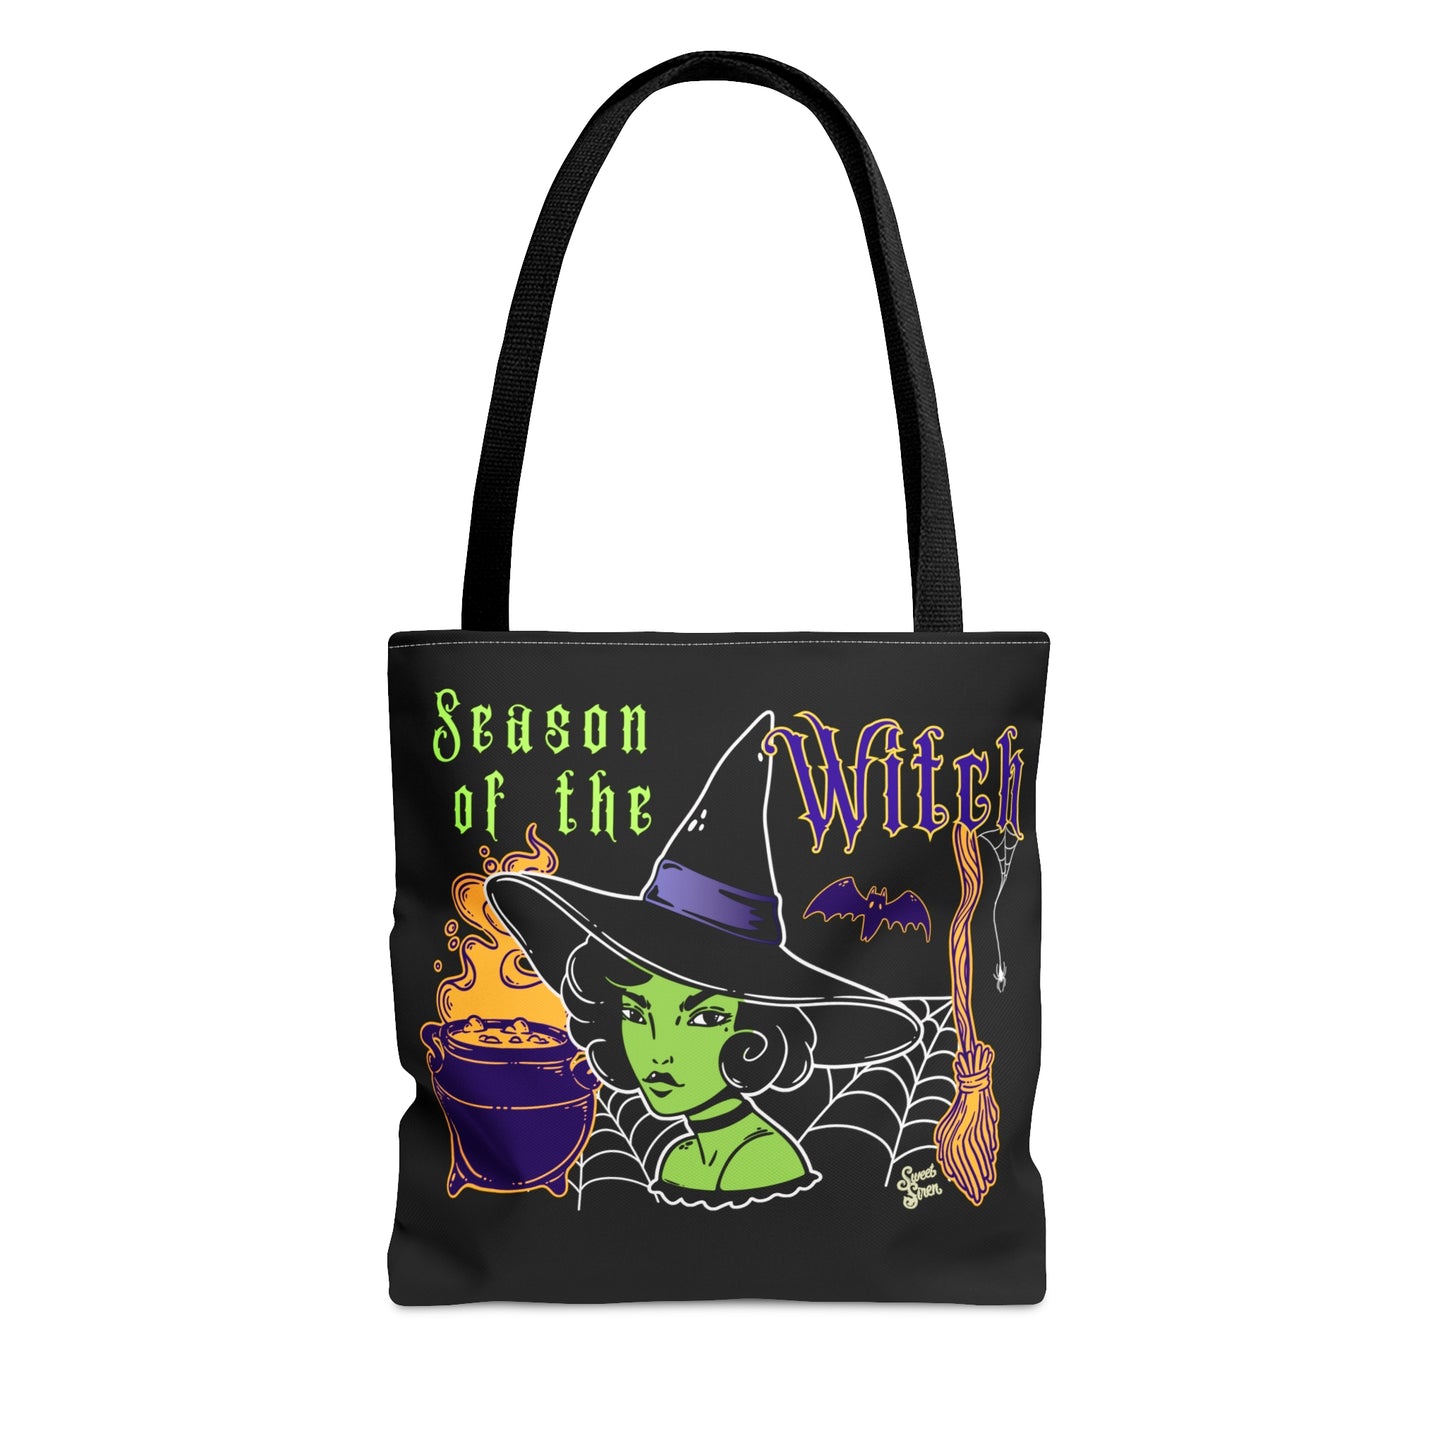 Season of the Witch - Tote Bag